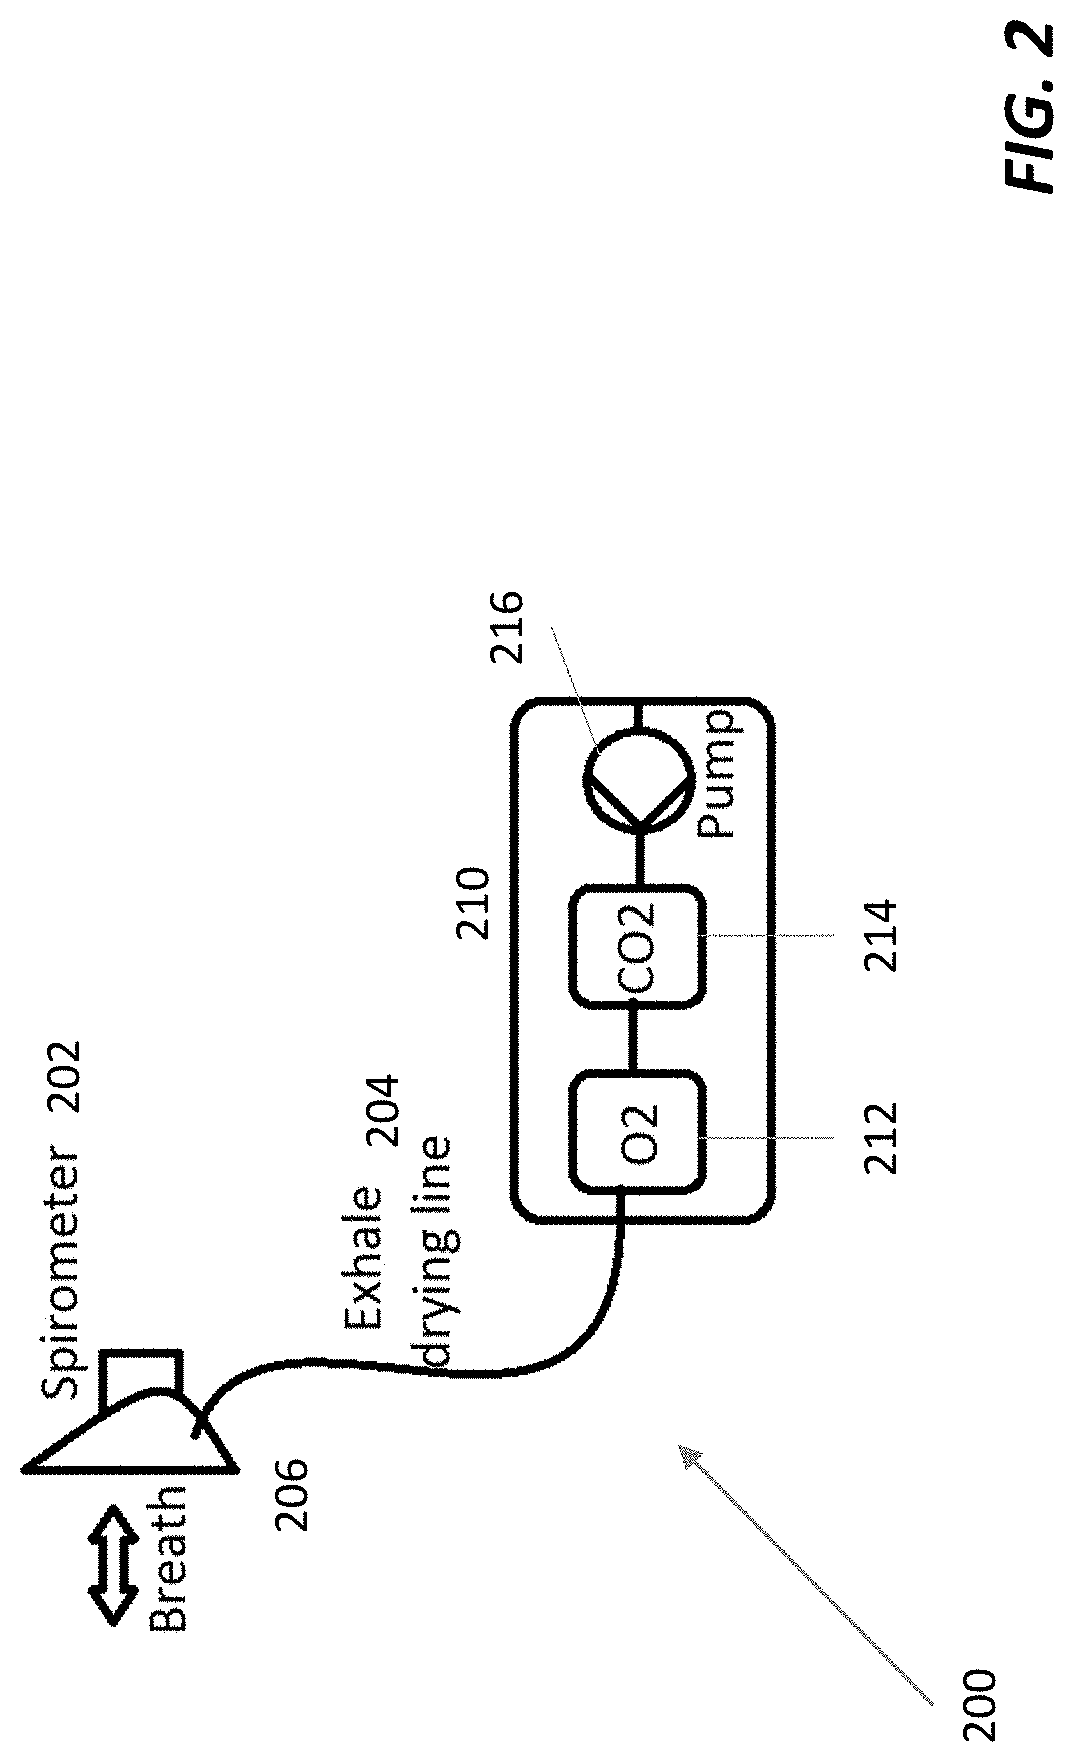 Methods and apparatus for passive, proportional, valveless gas sampling and delivery